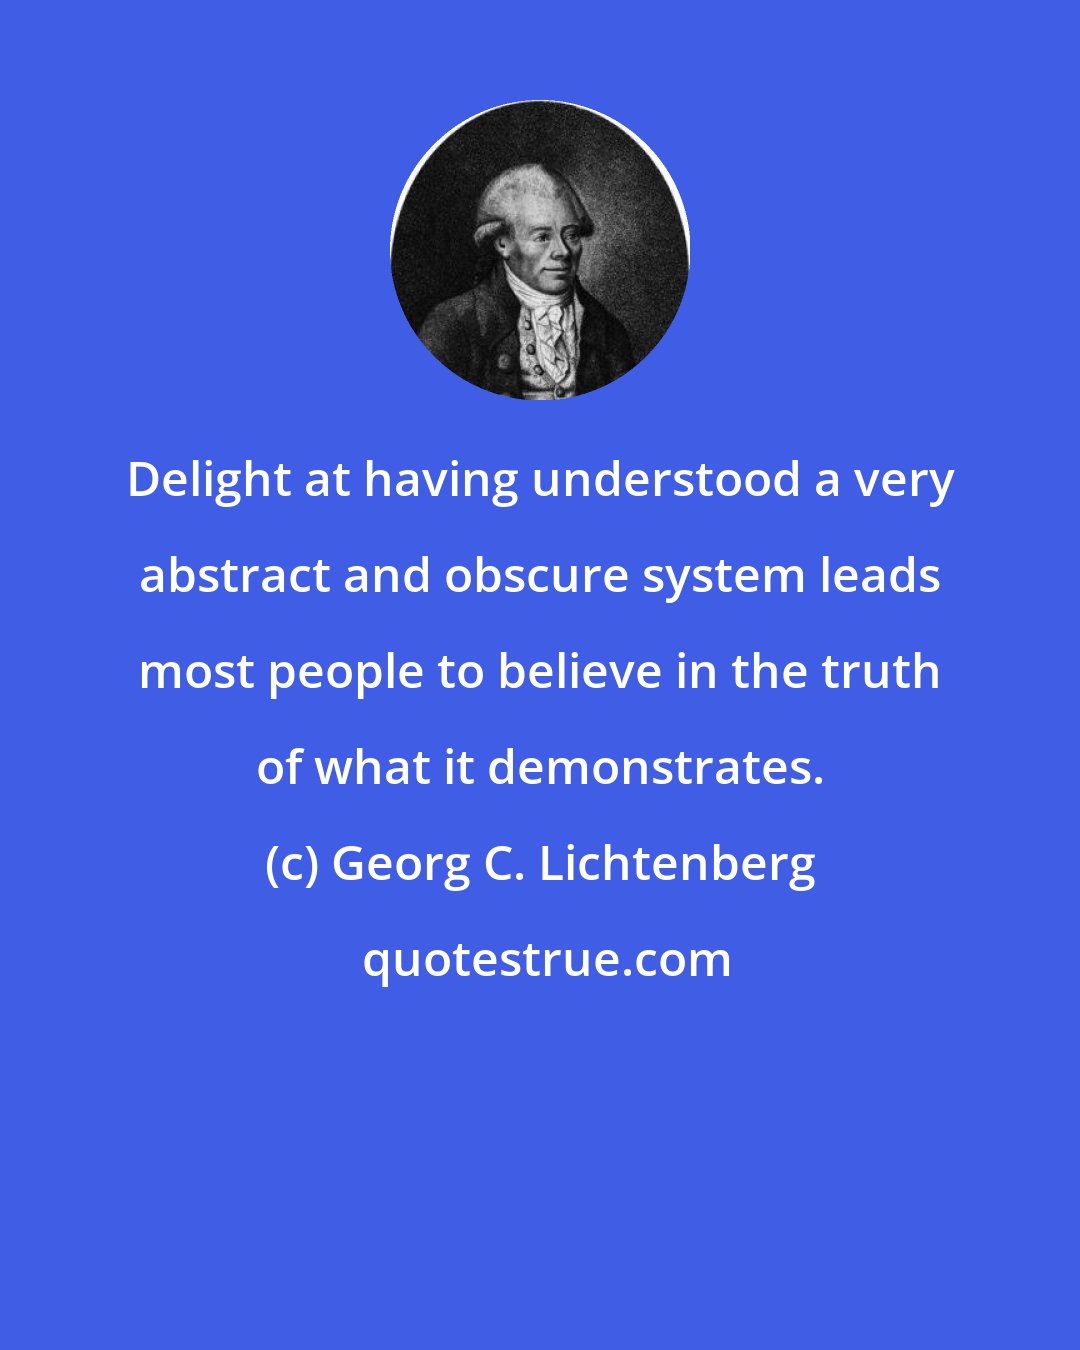 Georg C. Lichtenberg: Delight at having understood a very abstract and obscure system leads most people to believe in the truth of what it demonstrates.